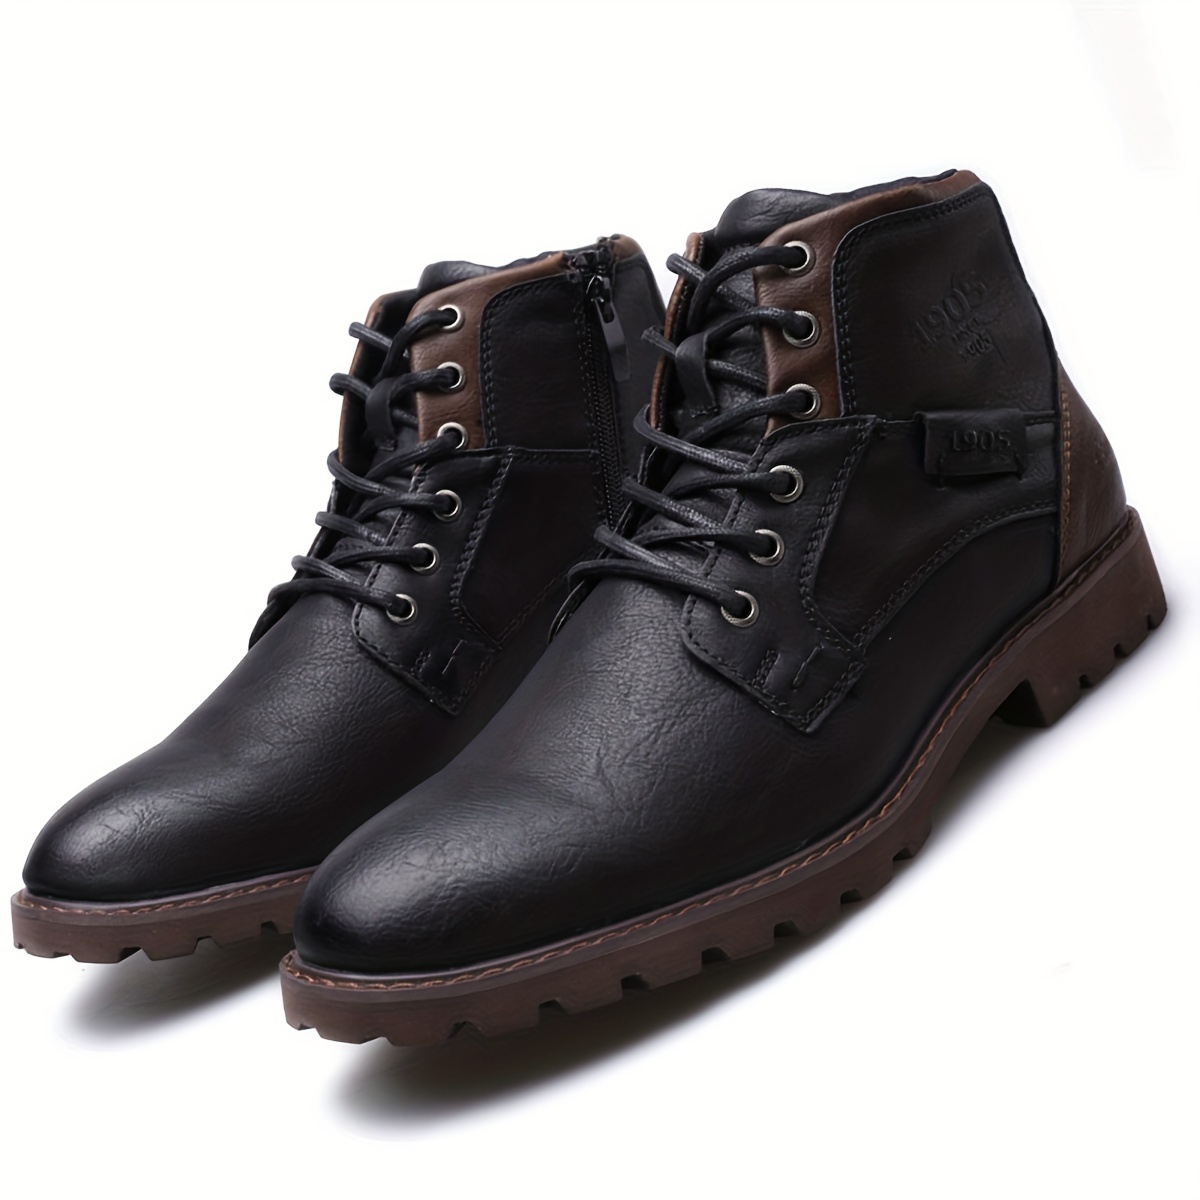 mens ankle boots lace up boots with side zipper retro vintage style casual walking shoes details 4